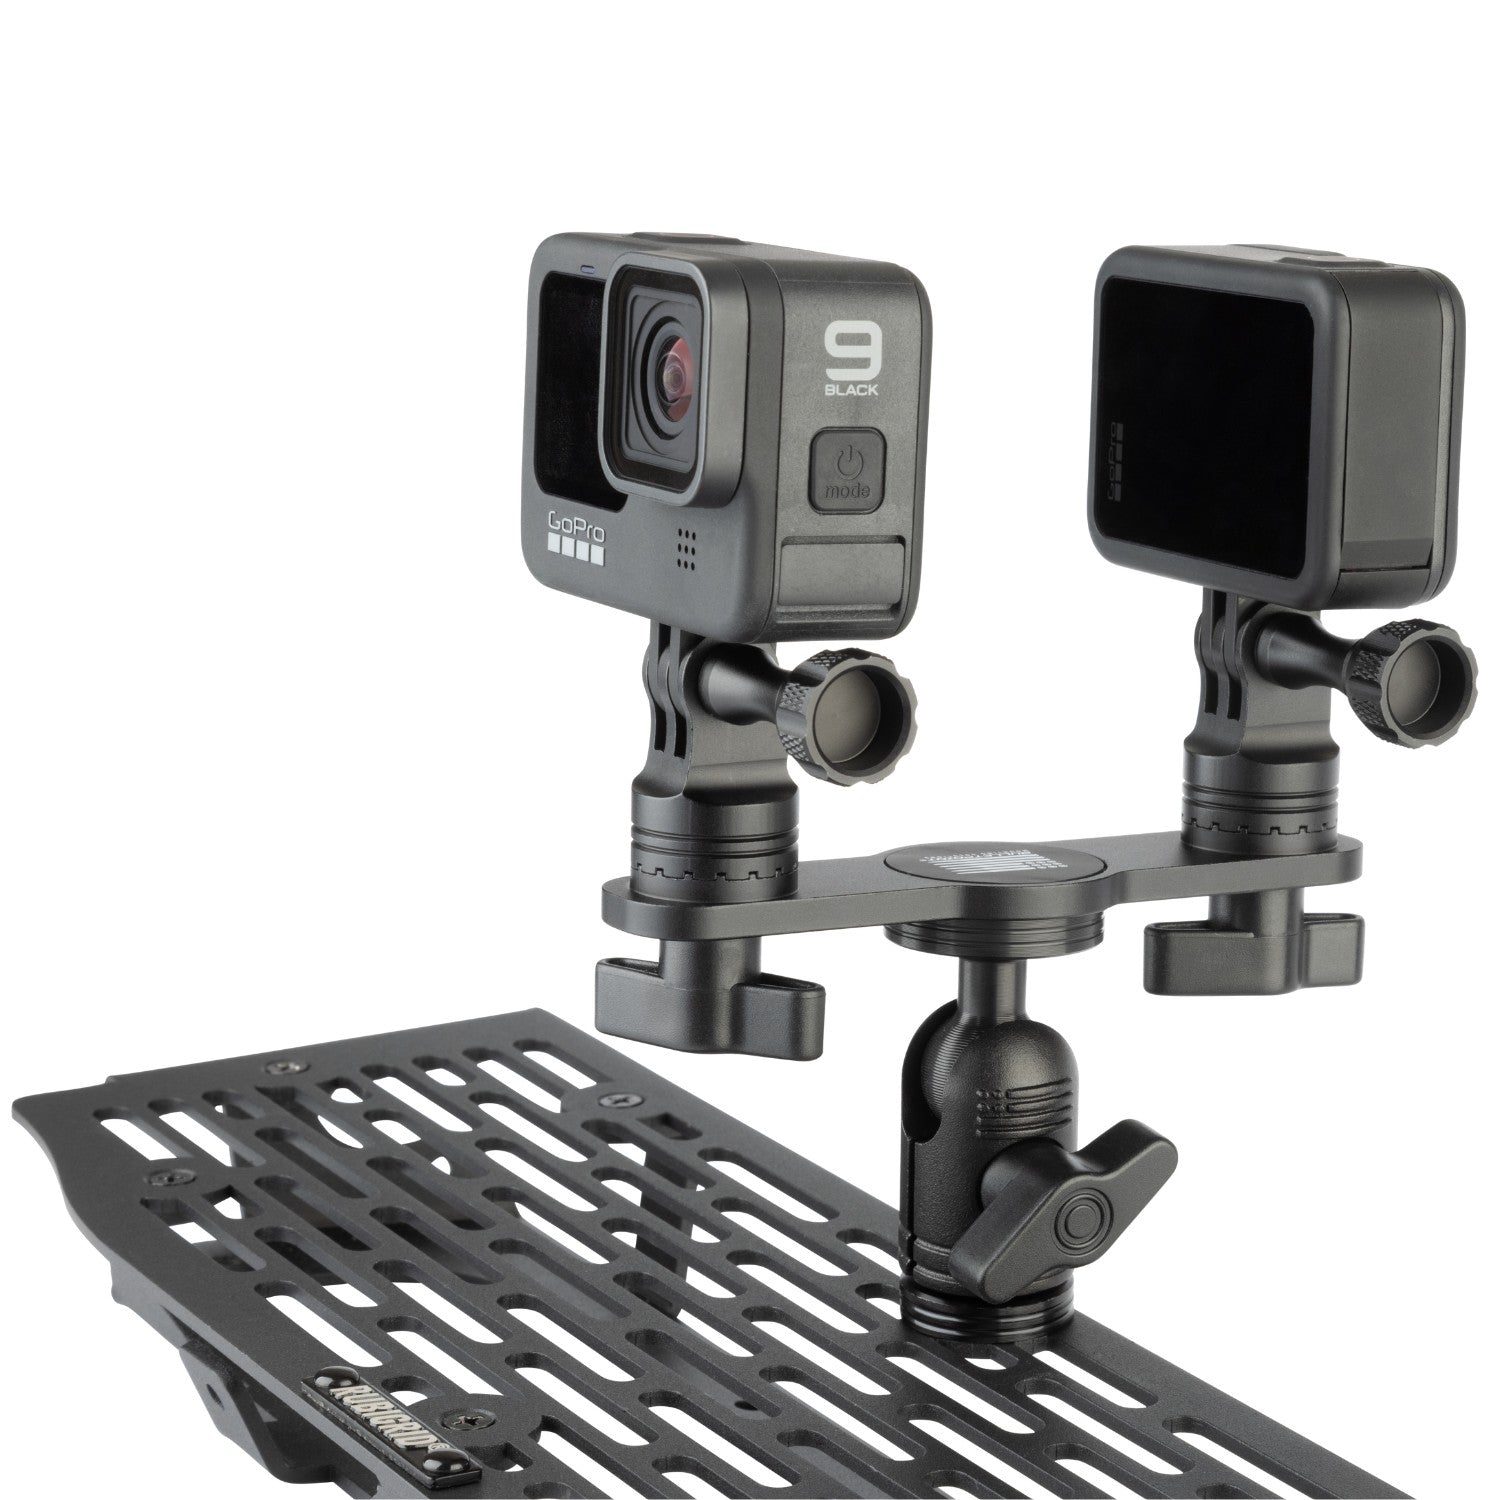 Dual Action Camera GoPro Mount with Integrated 20mm Ball - Bulletpoint  Mounting Solutions